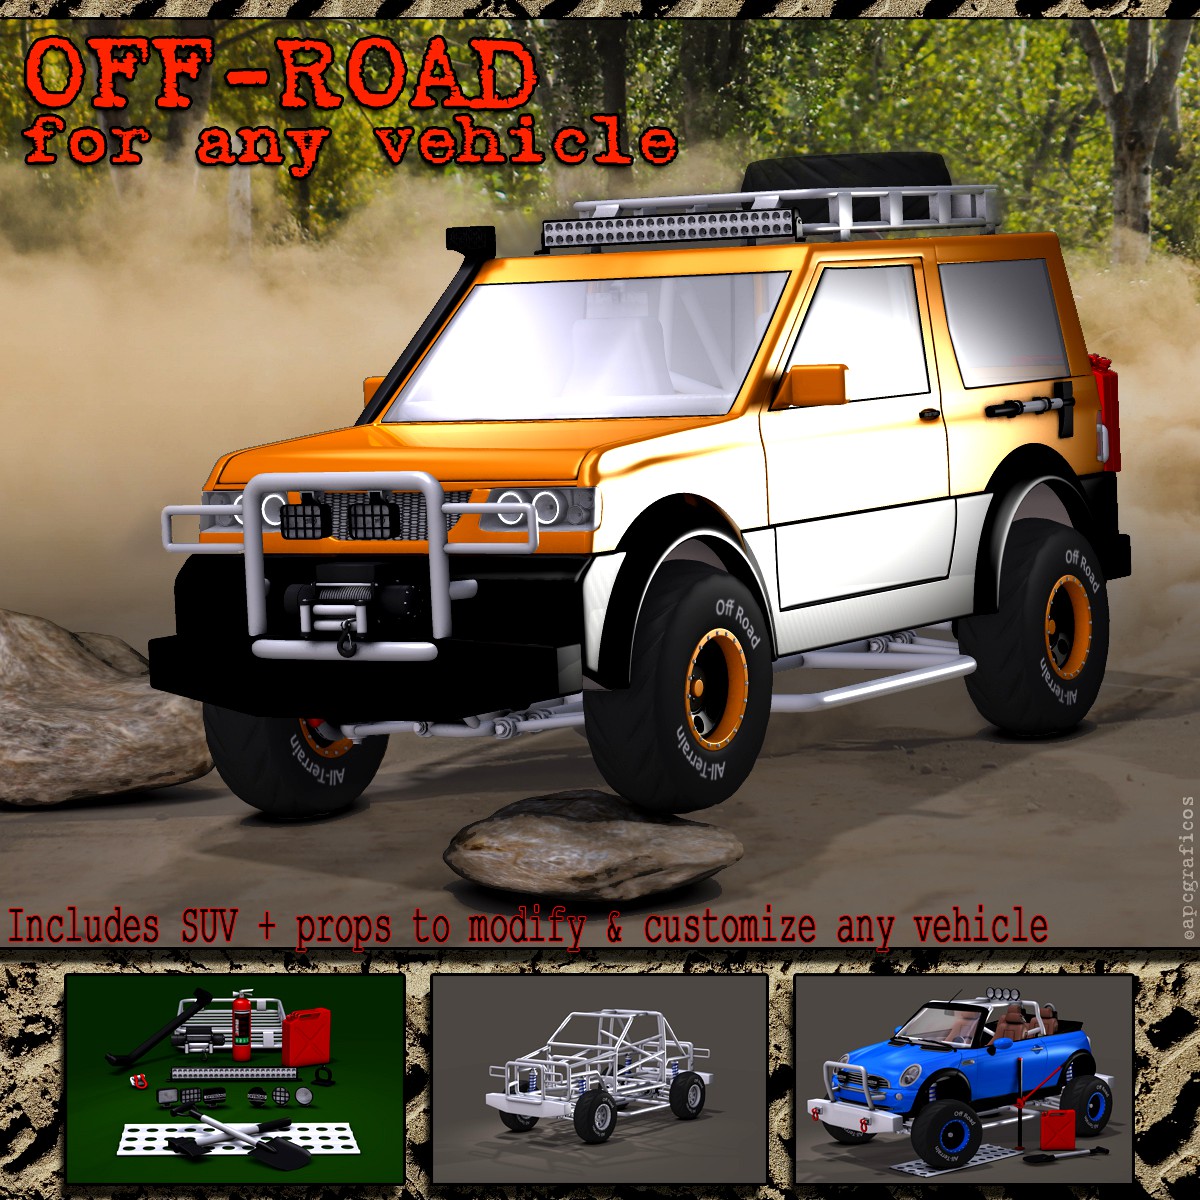 Off-road for any vehicle